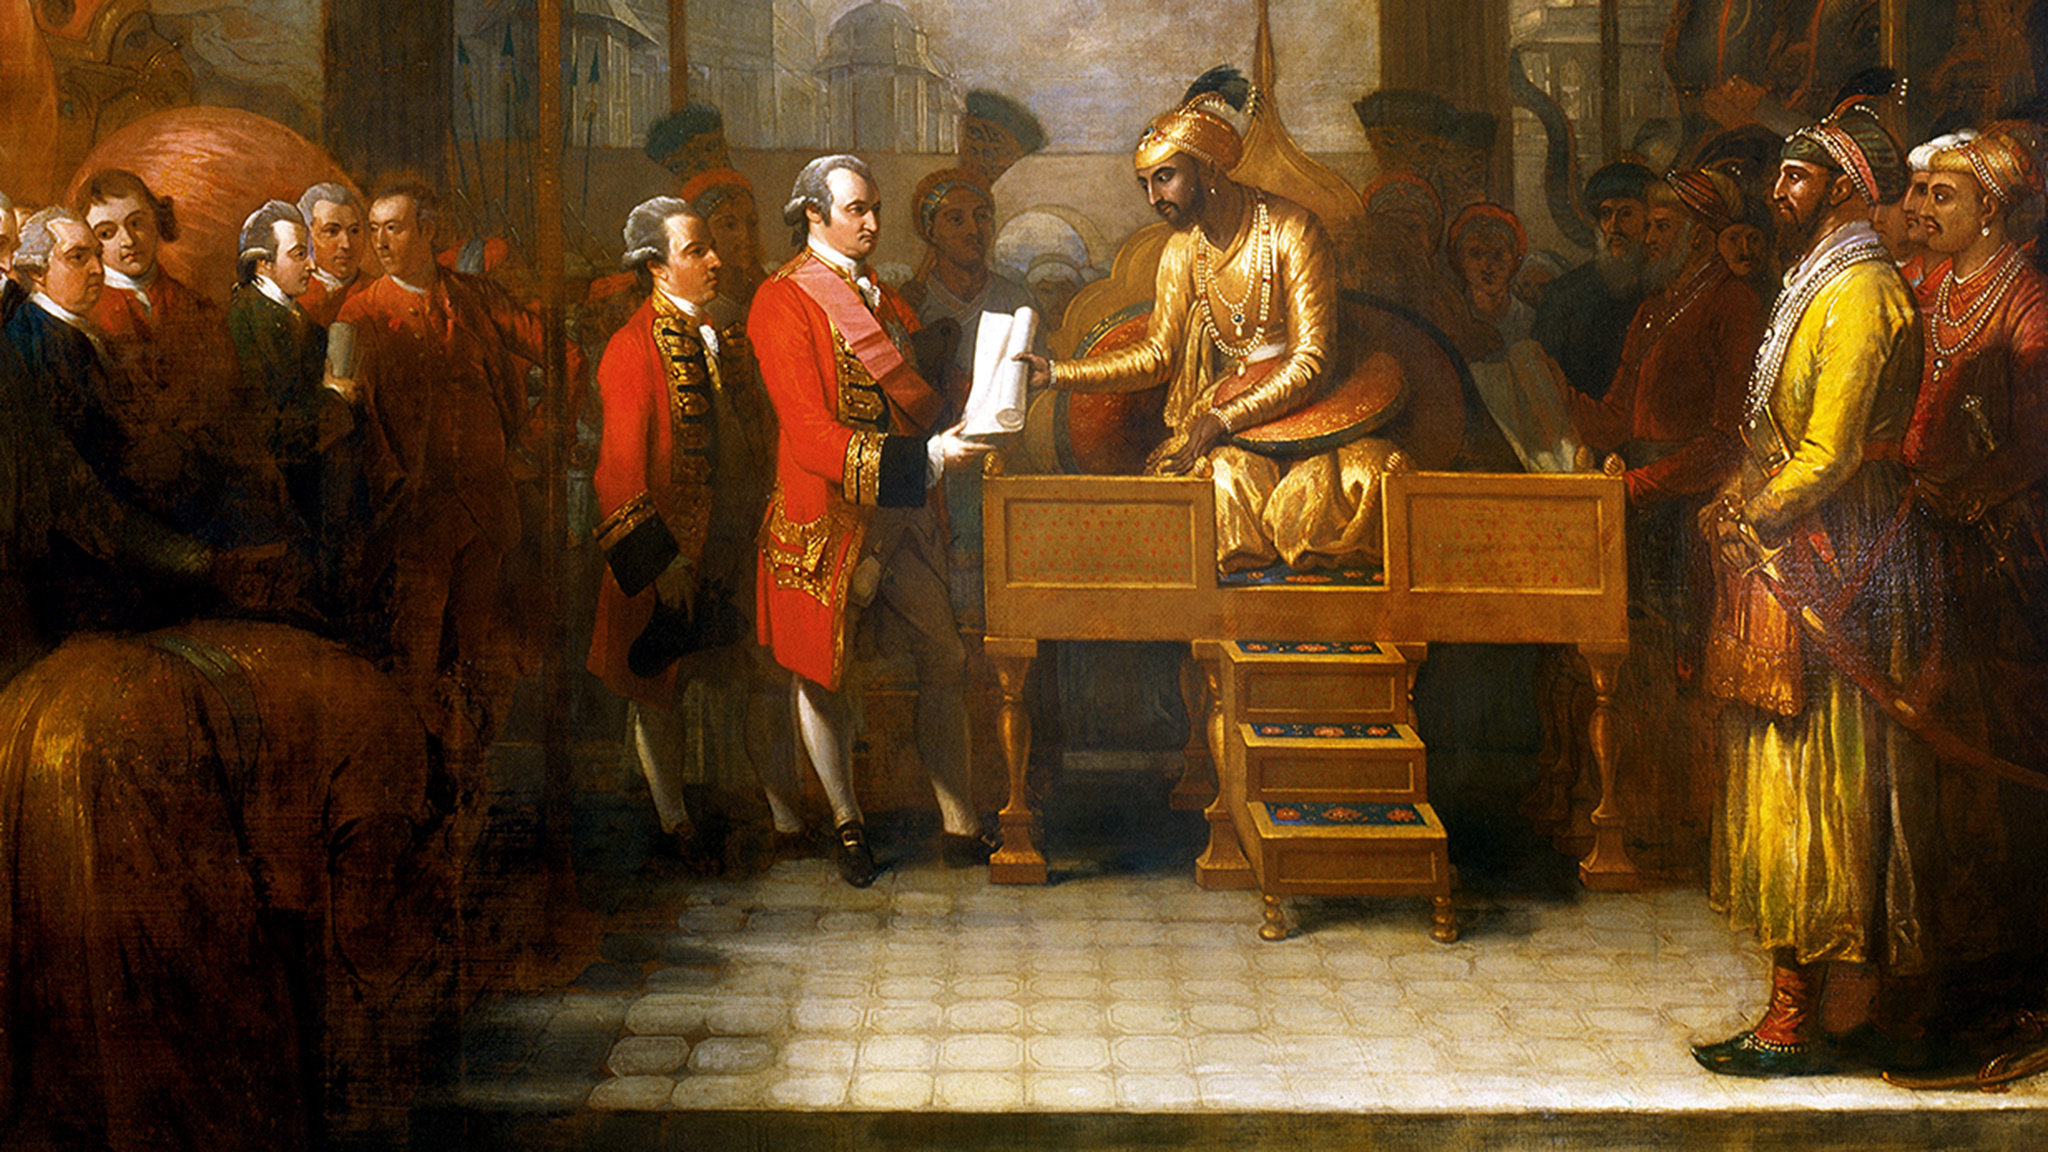 1547012 Shah 'Alam conveying the grant of the Diwani to Lord Clive, August 1765 (oil on canvas) by West, Benjamin (1738-1820); British Library, London, UK; (add.info.: Major-General Robert Clive, 1st Baron Clive, KB MP FRS (25 September 1725 – 22 November 1774), also known as Clive of India, was a British officer and soldier of fortune who established the military and political supremacy of the East India Company in Bengal. He is credited with securing India, and the wealth that followed, for the British crown. Together with Warren Hastings he was one of the key early figures in the creation of British India. He also sat in a rotten borough as a Tory Member of Parliament in Great Britain.); © British Library Board. All Rights Reserved; American,  out of copyright.PLEASE NOTE: Bridgeman Images works with the owner of this image to clear permission. If you wish to reproduce this image, please inform us so we can clear permission for you.